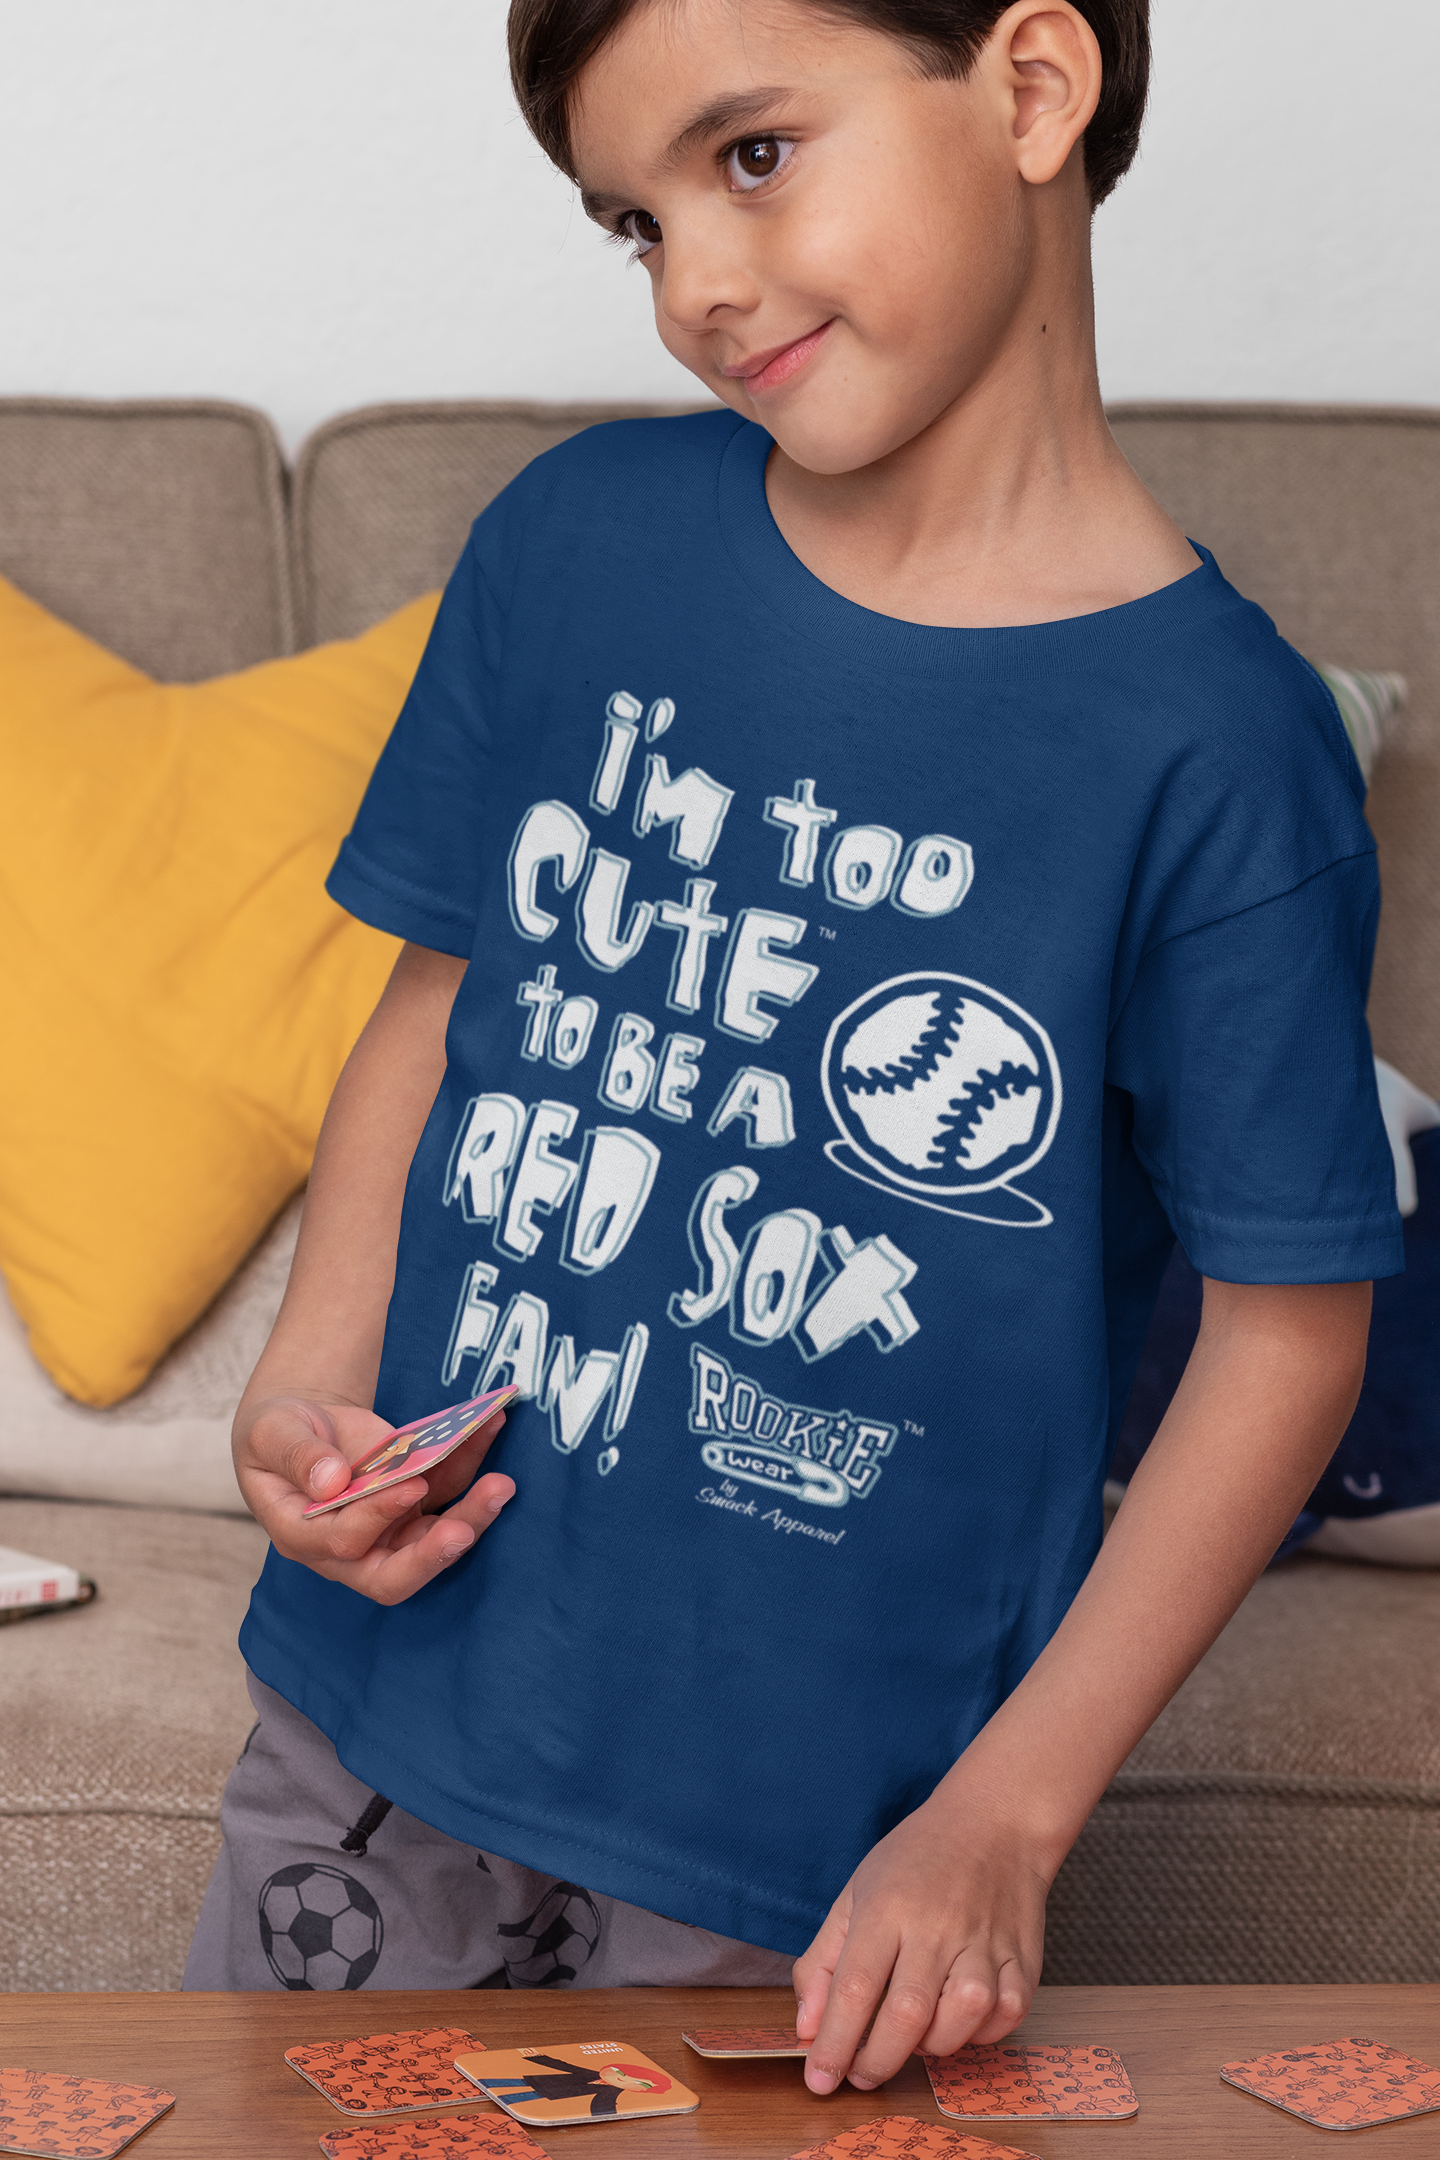 New York Baseball Fans (NYY). I'm Too Cute Baby Bodysuit (NB-18M) or Toddler Tee (2T-4T) (Rookie Wear by Smack Apparel) 3T / Toddler Tee (Anti-Red Sox